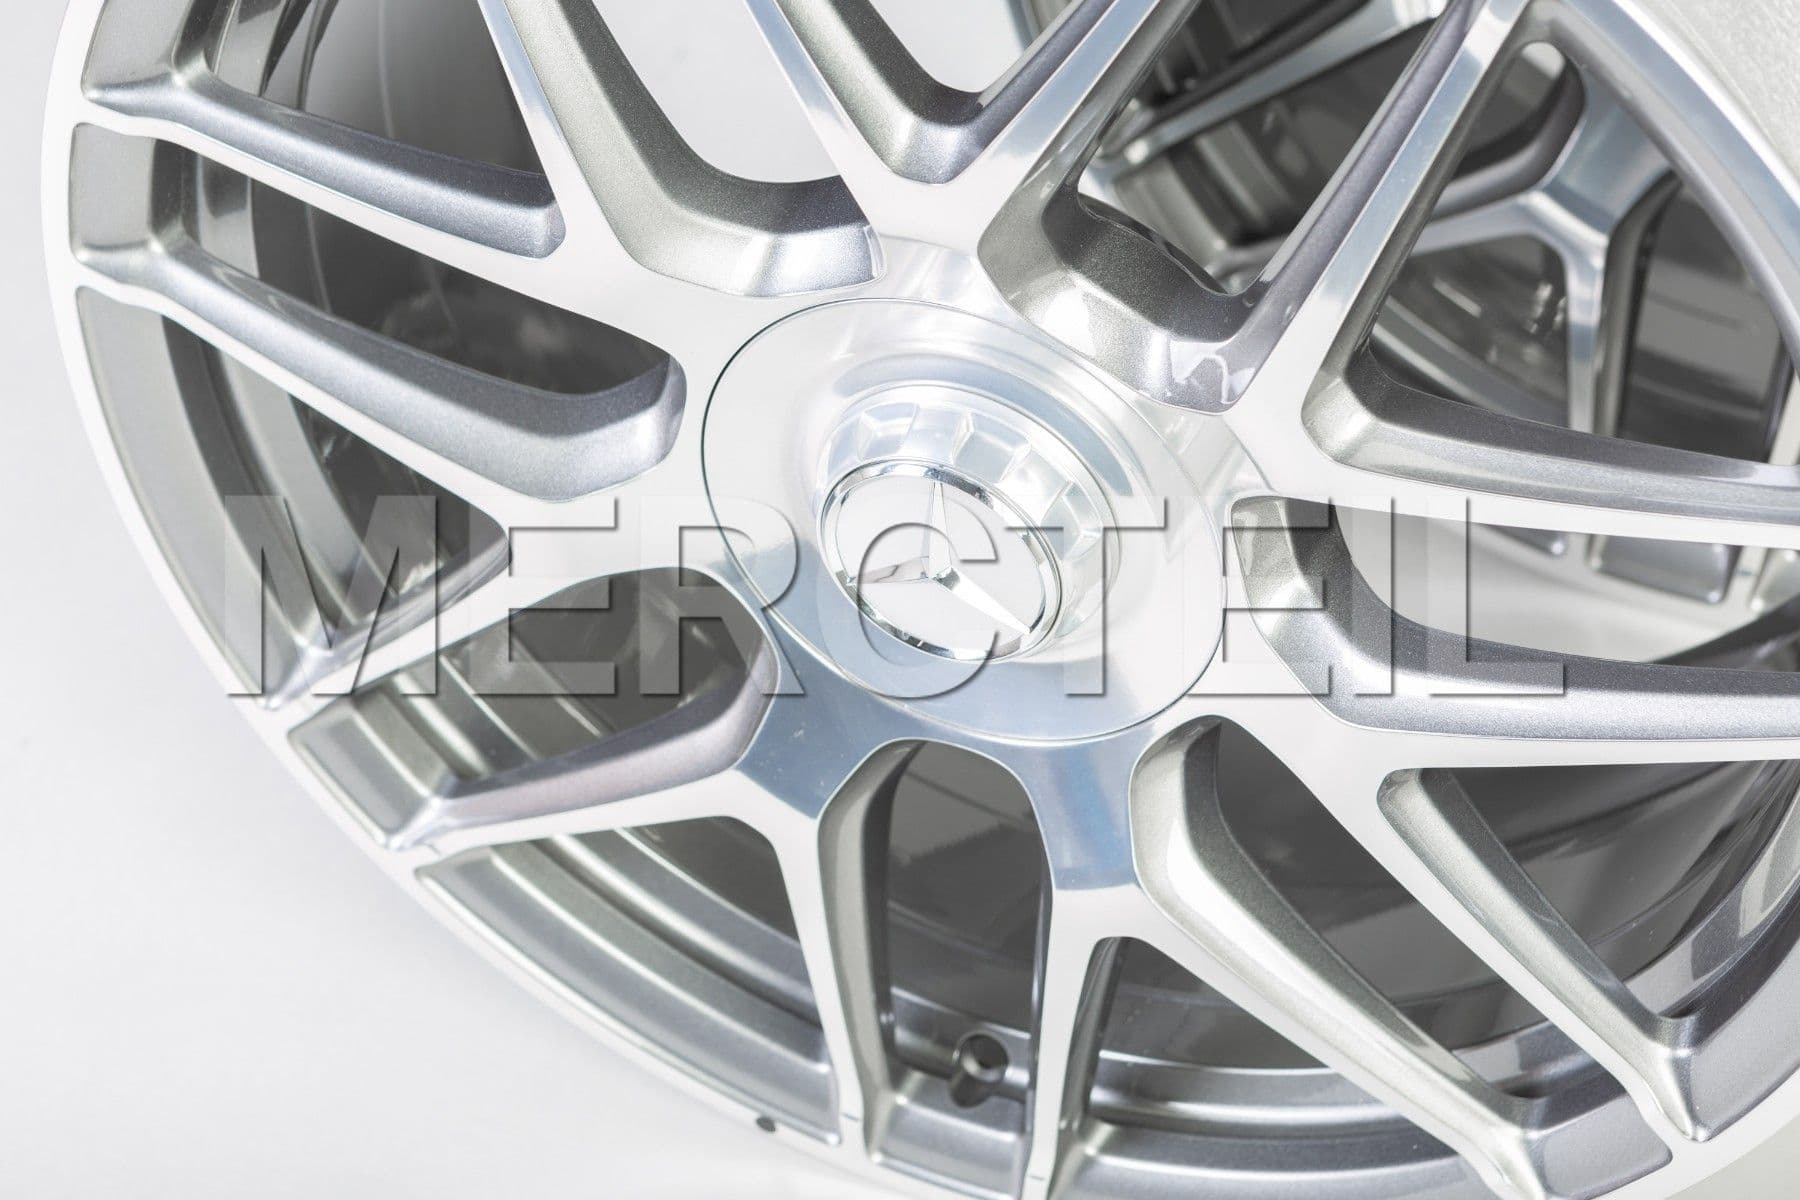 CLA45 AMG Himalaya Grey Forged Rims for CLA-Class (part number: A17740124007X21)